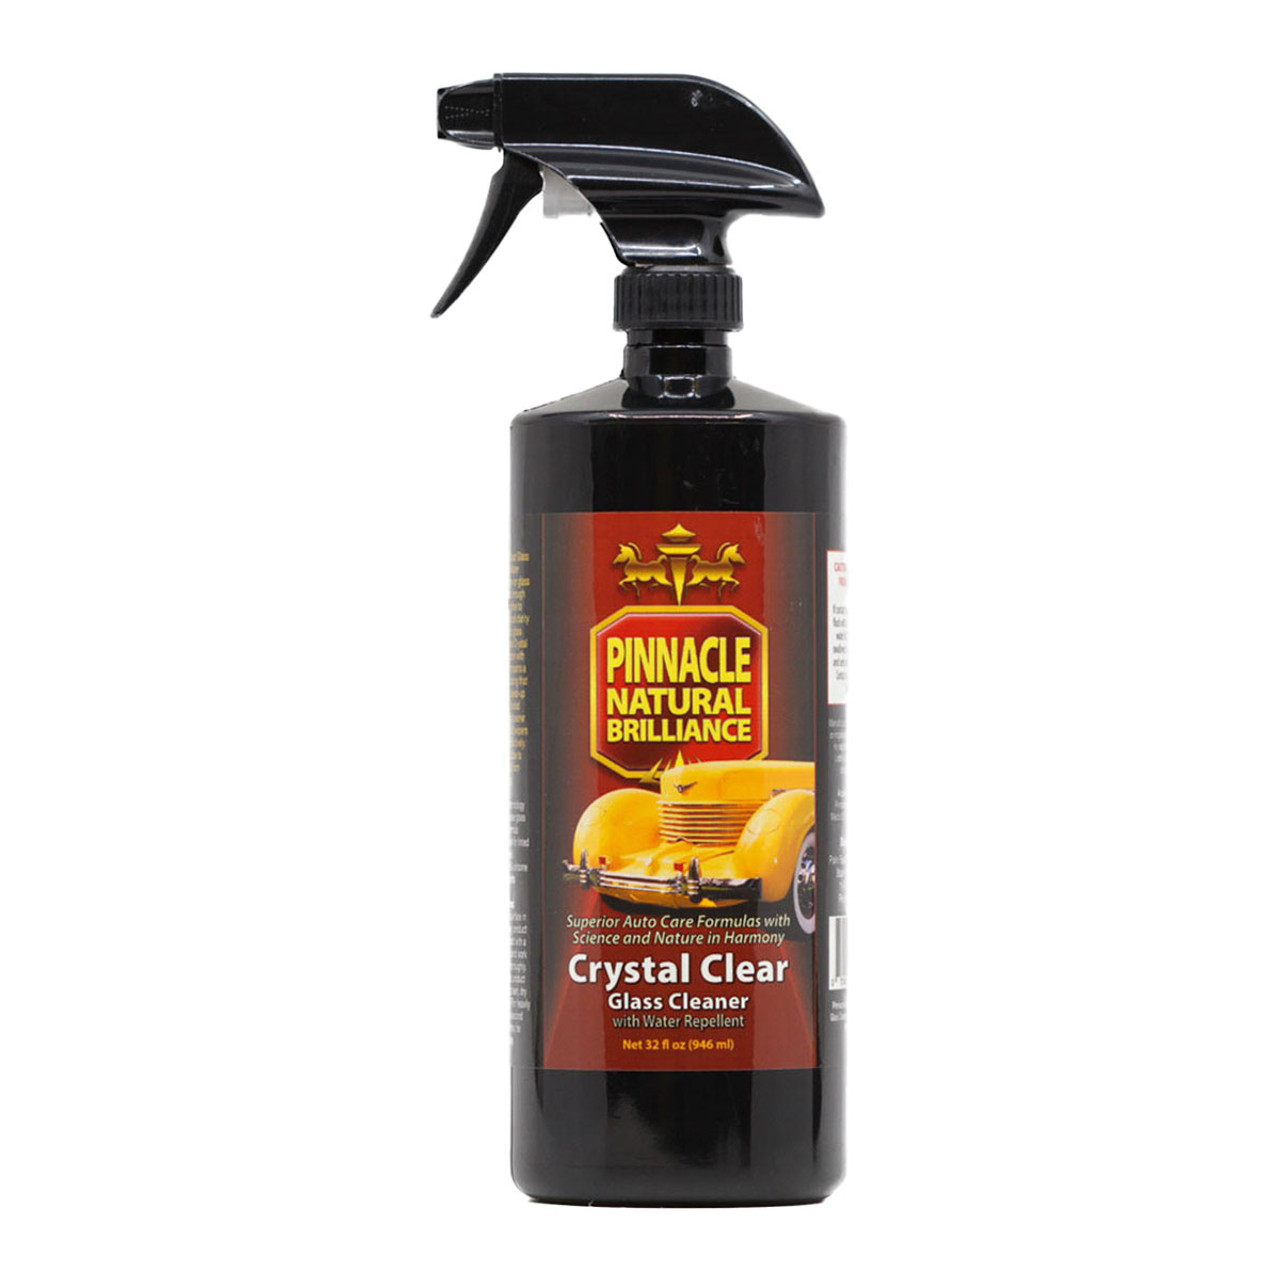 Pinnacle Crystal Clear Glass Cleaner with Water Repellent 32 oz.